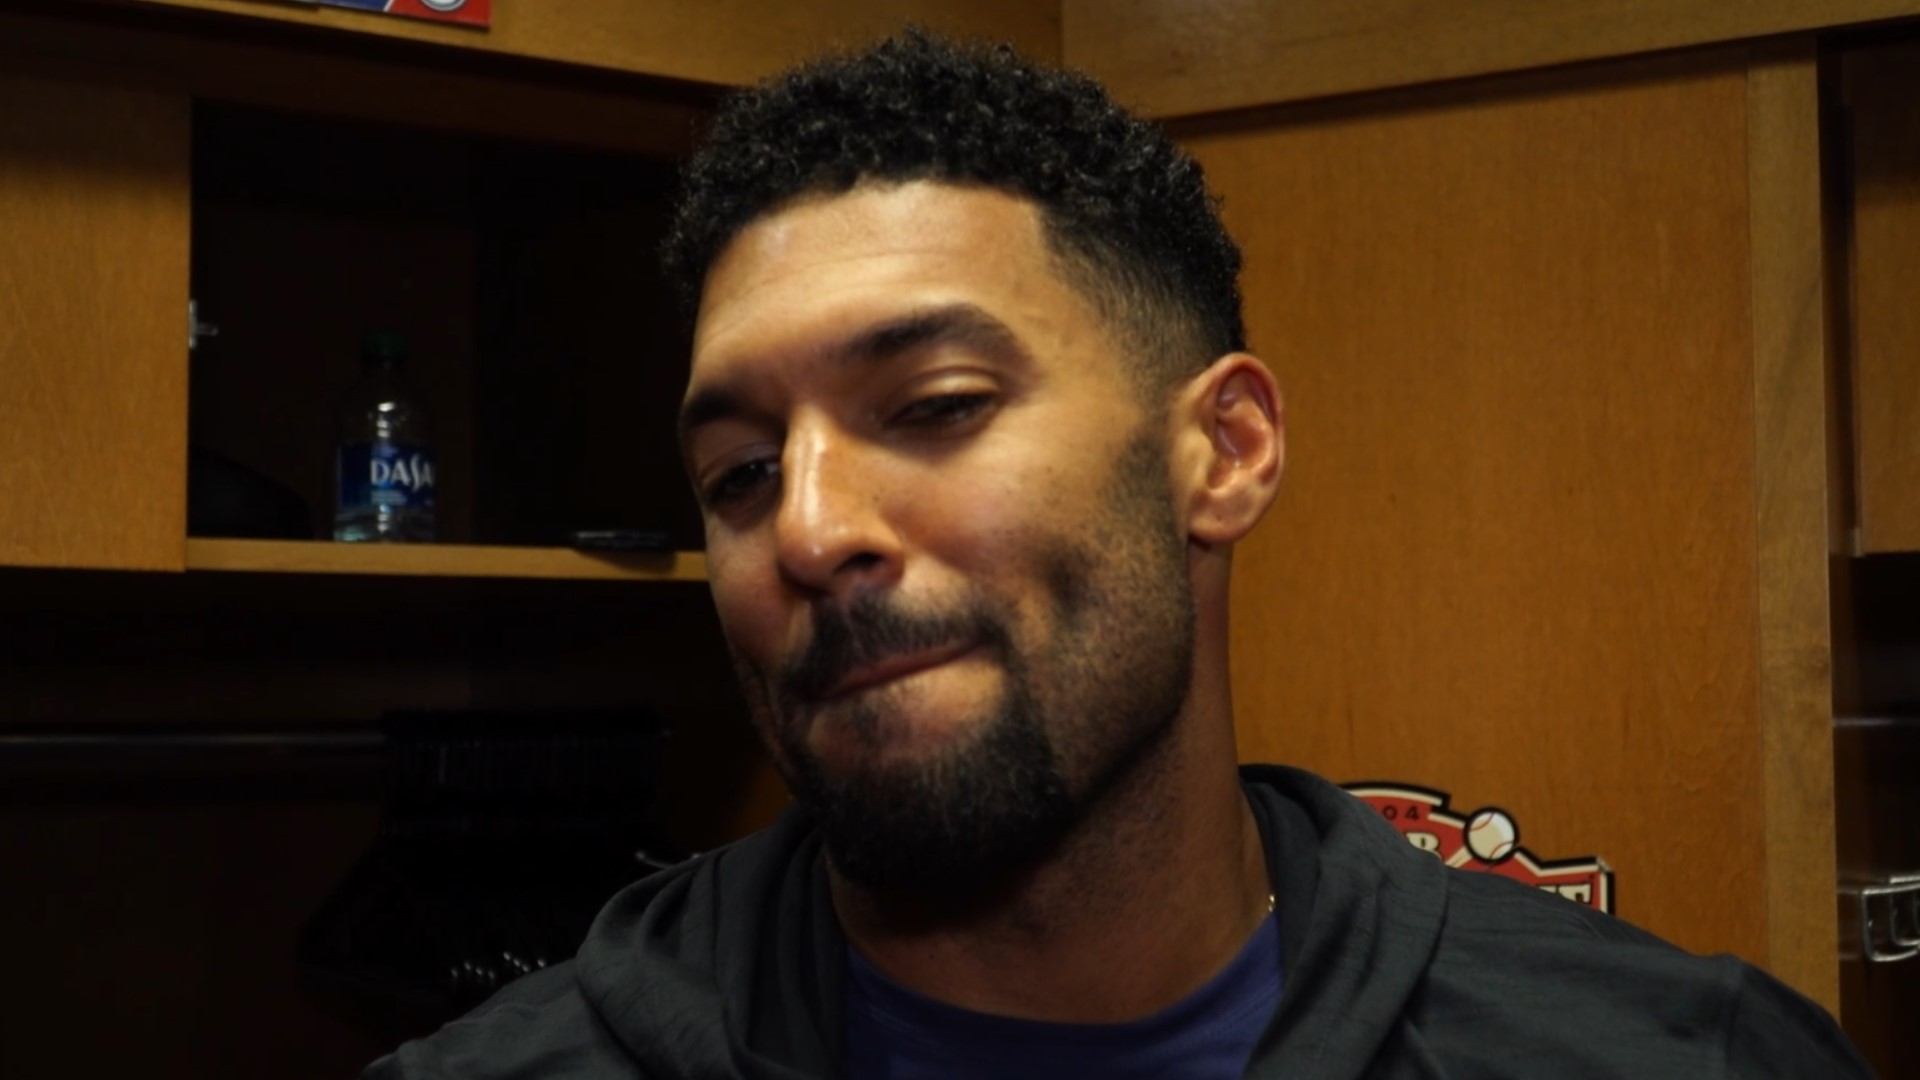 Texas Rangers second baseman Marcus Semien explained what happened during the dustup against the Houston Astros on Wednesday night. (Via Rangers)